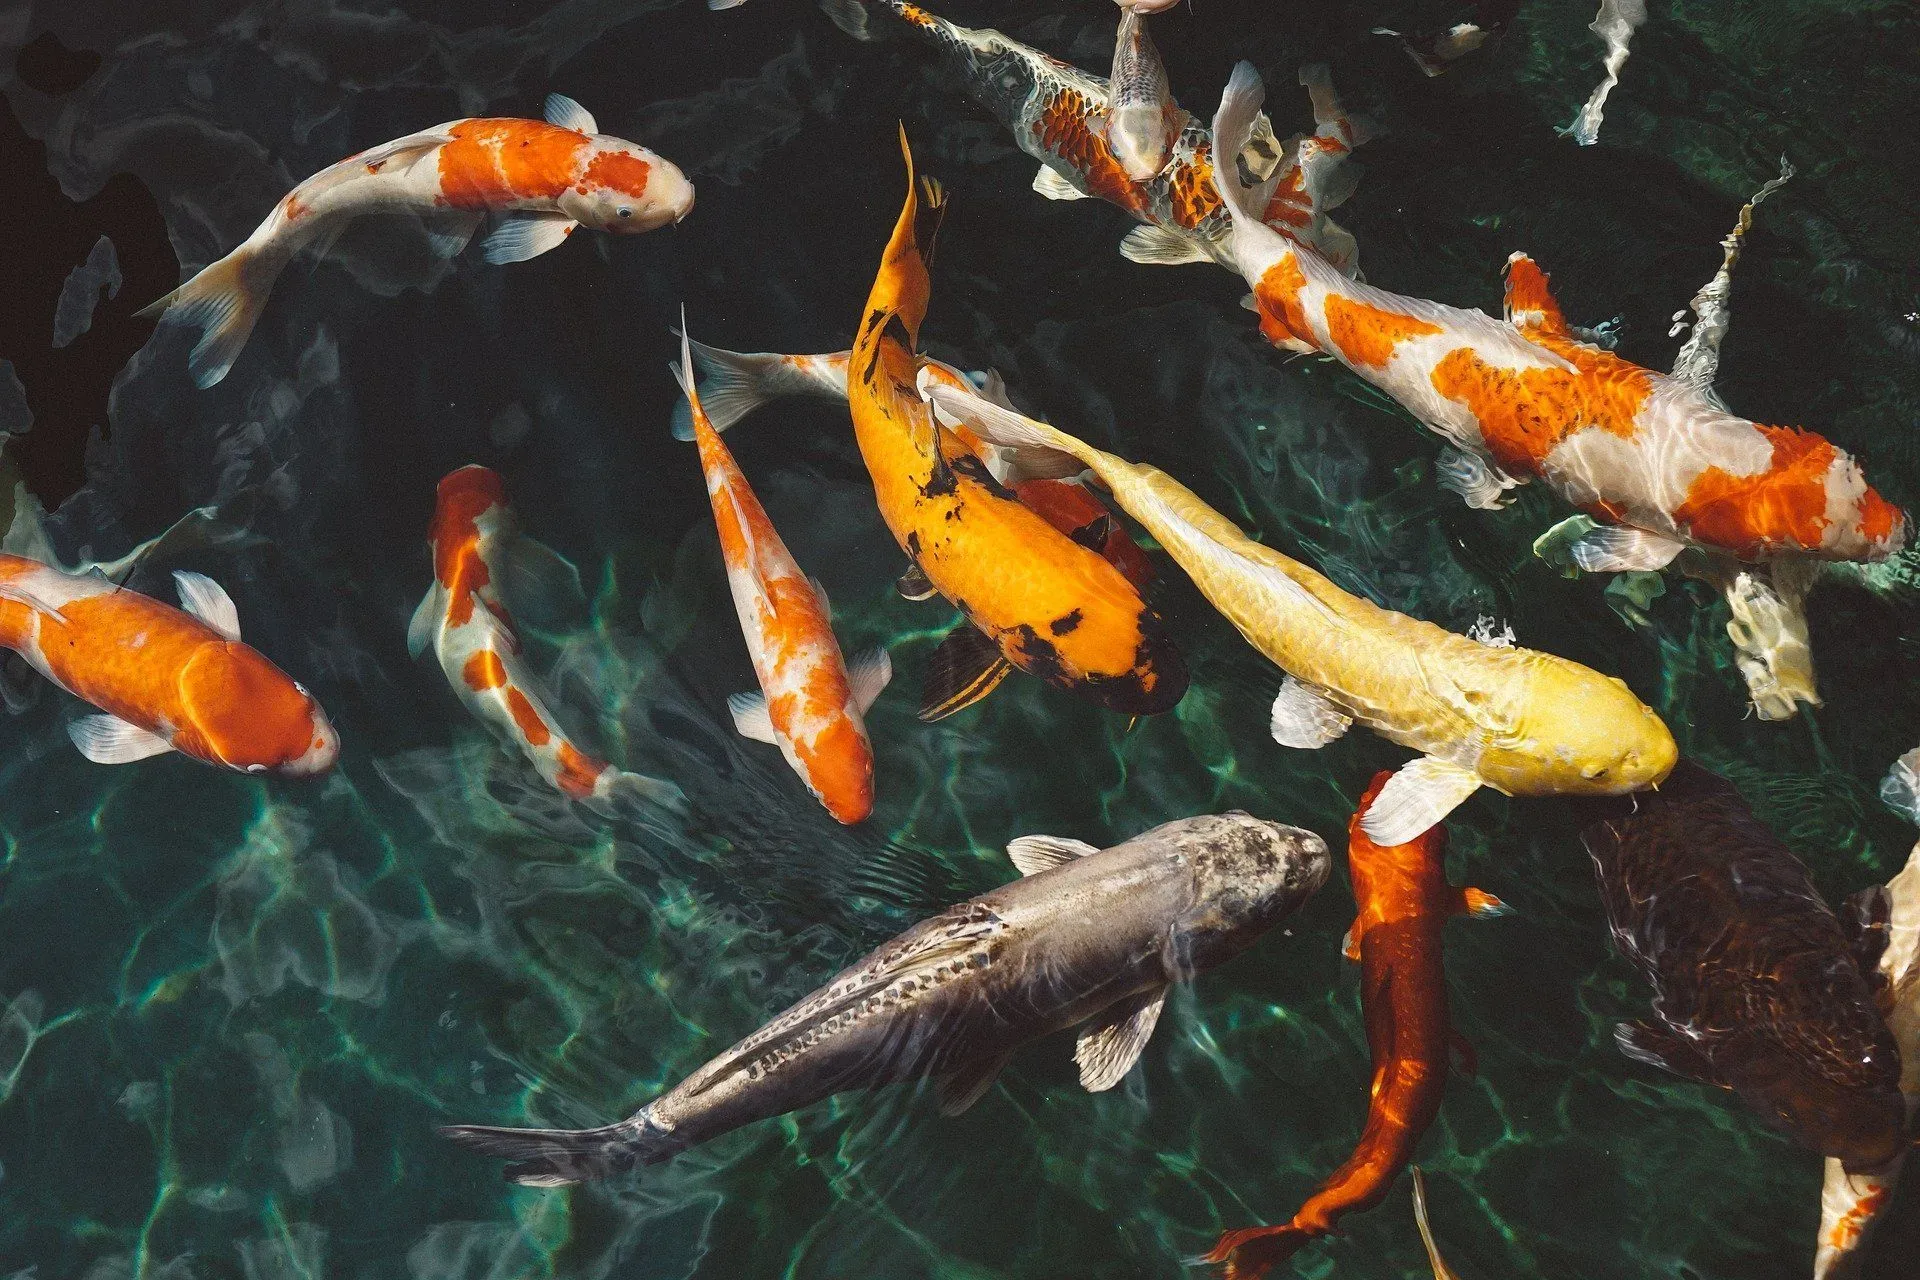 Most fish owners wonder about the answer to the question 'how long do koi fish live?'